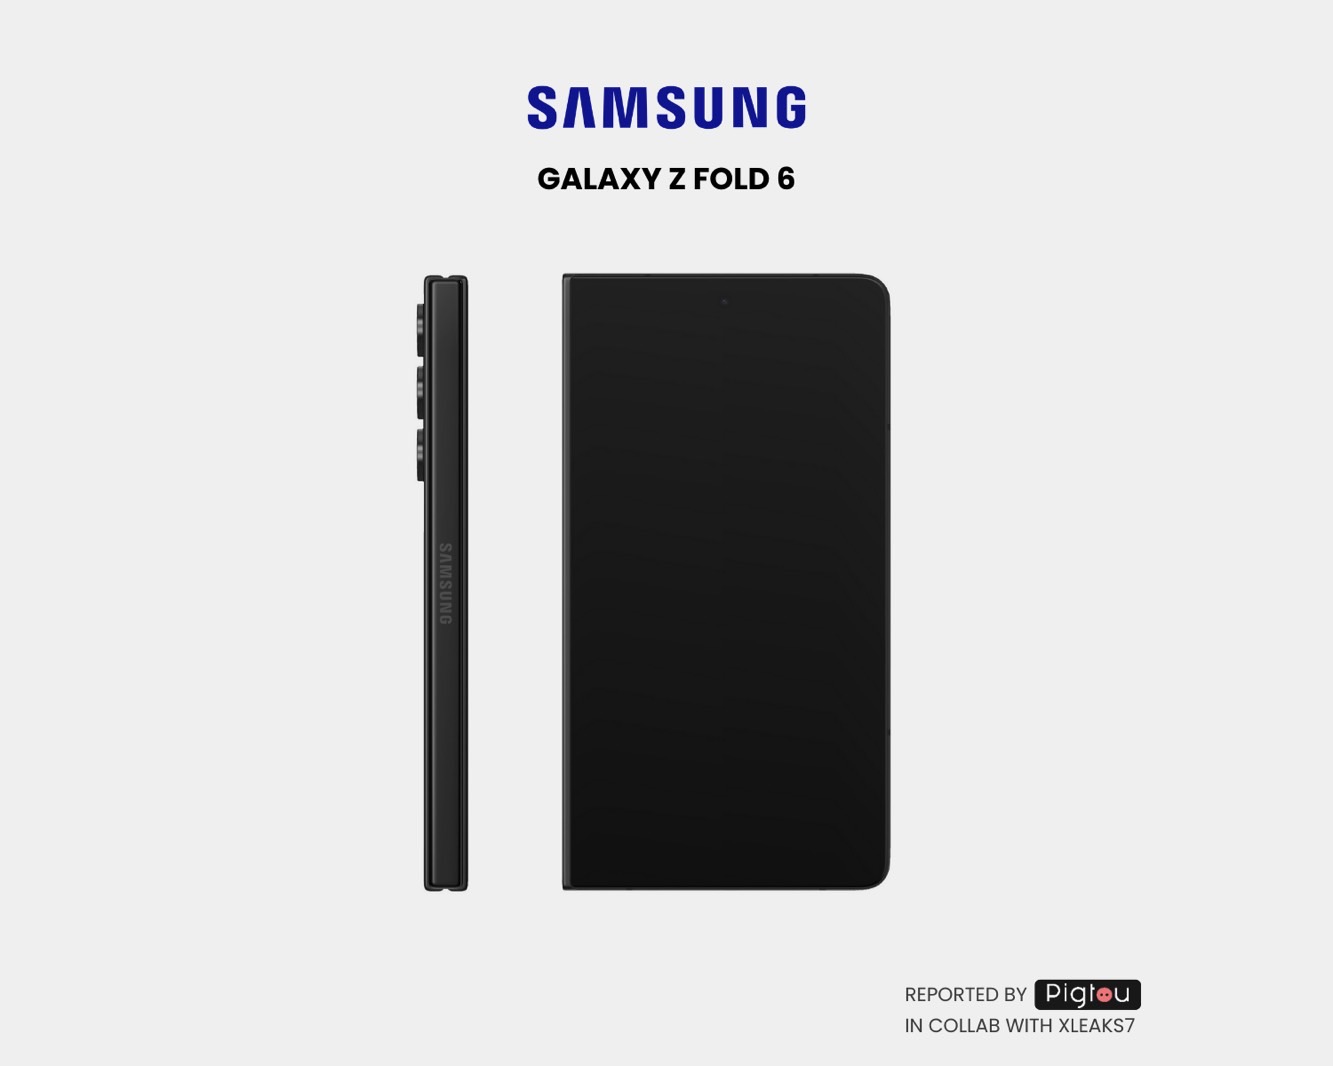 Galaxy Z Fold 6 design render based on Samsung patent shows a wider external display.